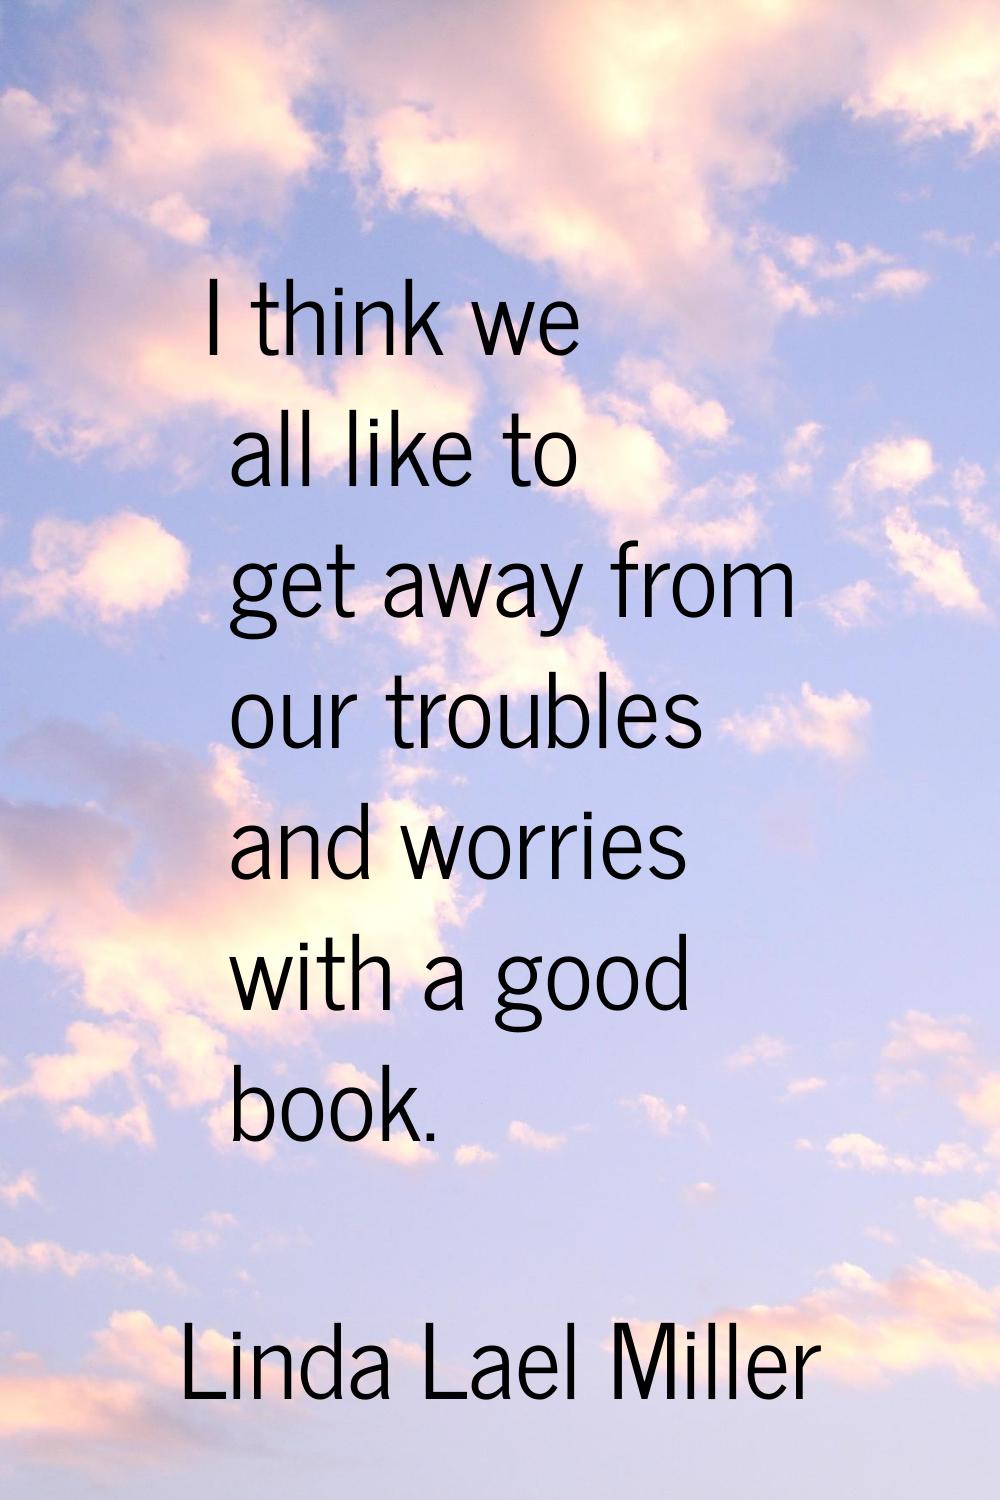 I think we all like to get away from our troubles and worries with a good book.